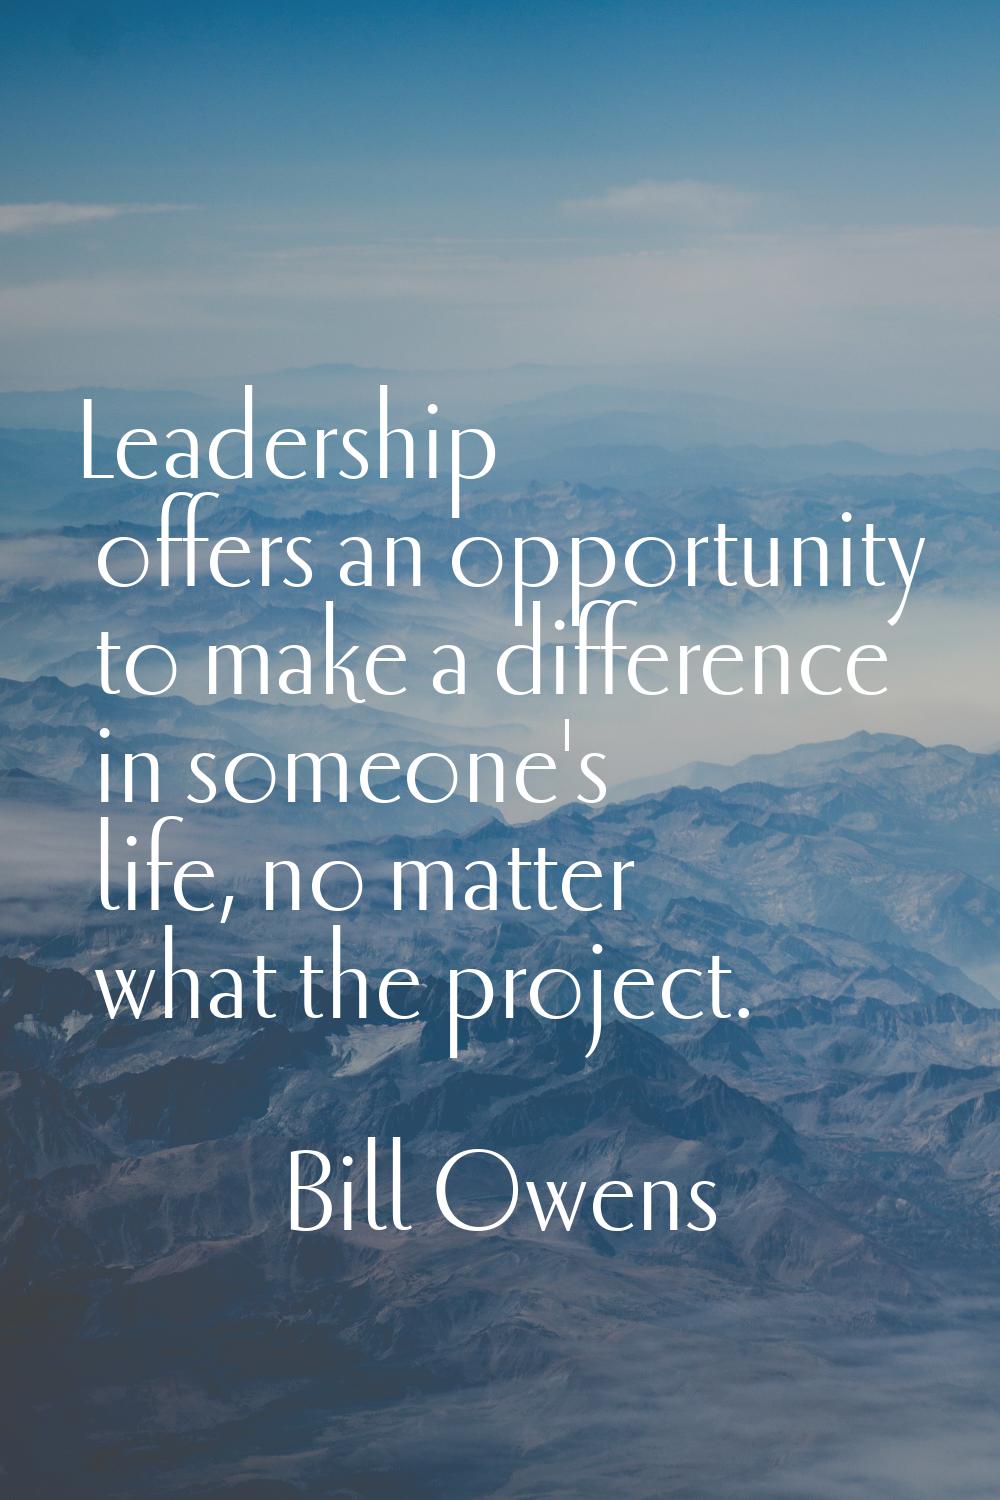 Leadership offers an opportunity to make a difference in someone's life, no matter what the project